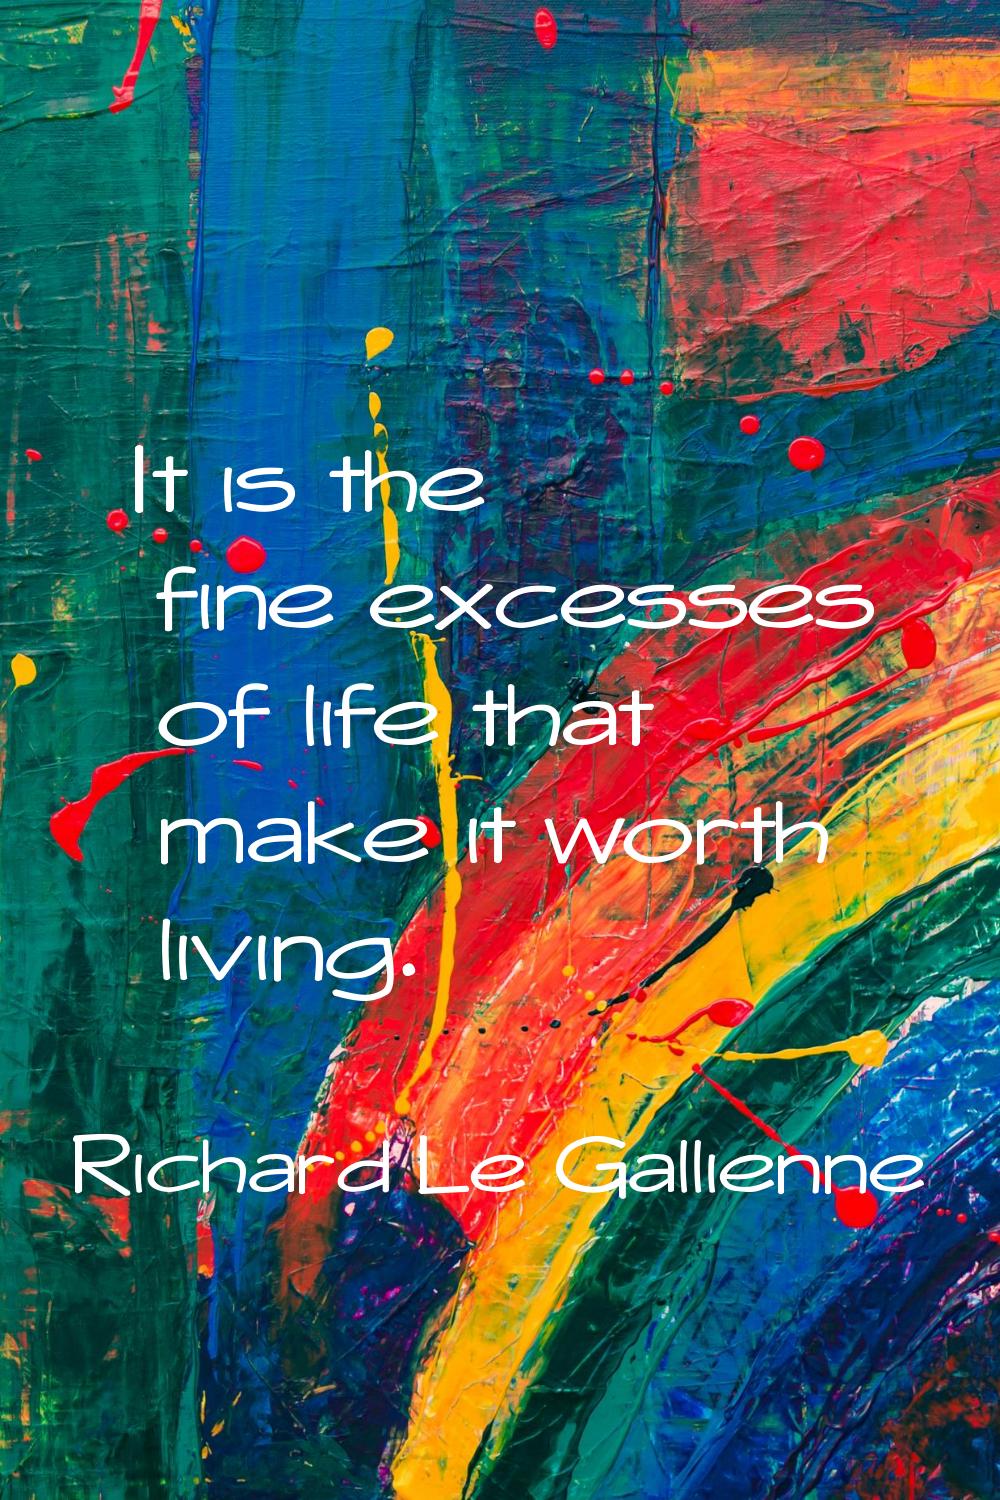 It is the fine excesses of life that make it worth living.